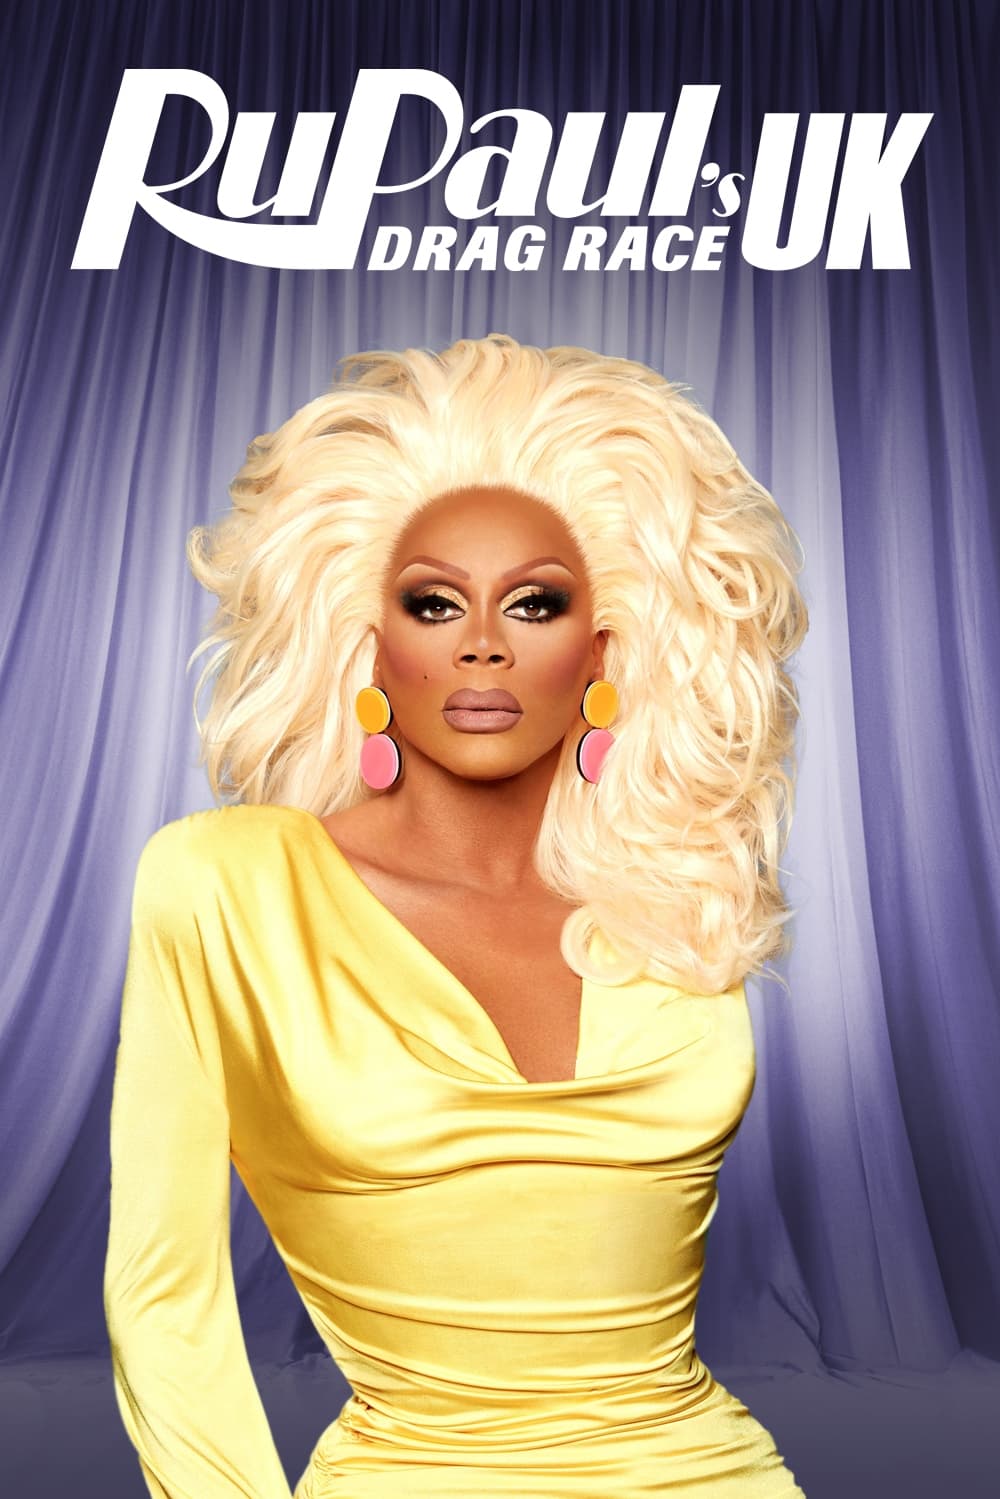 RuPaul's Drag Race UK TV Shows About Gay Culture